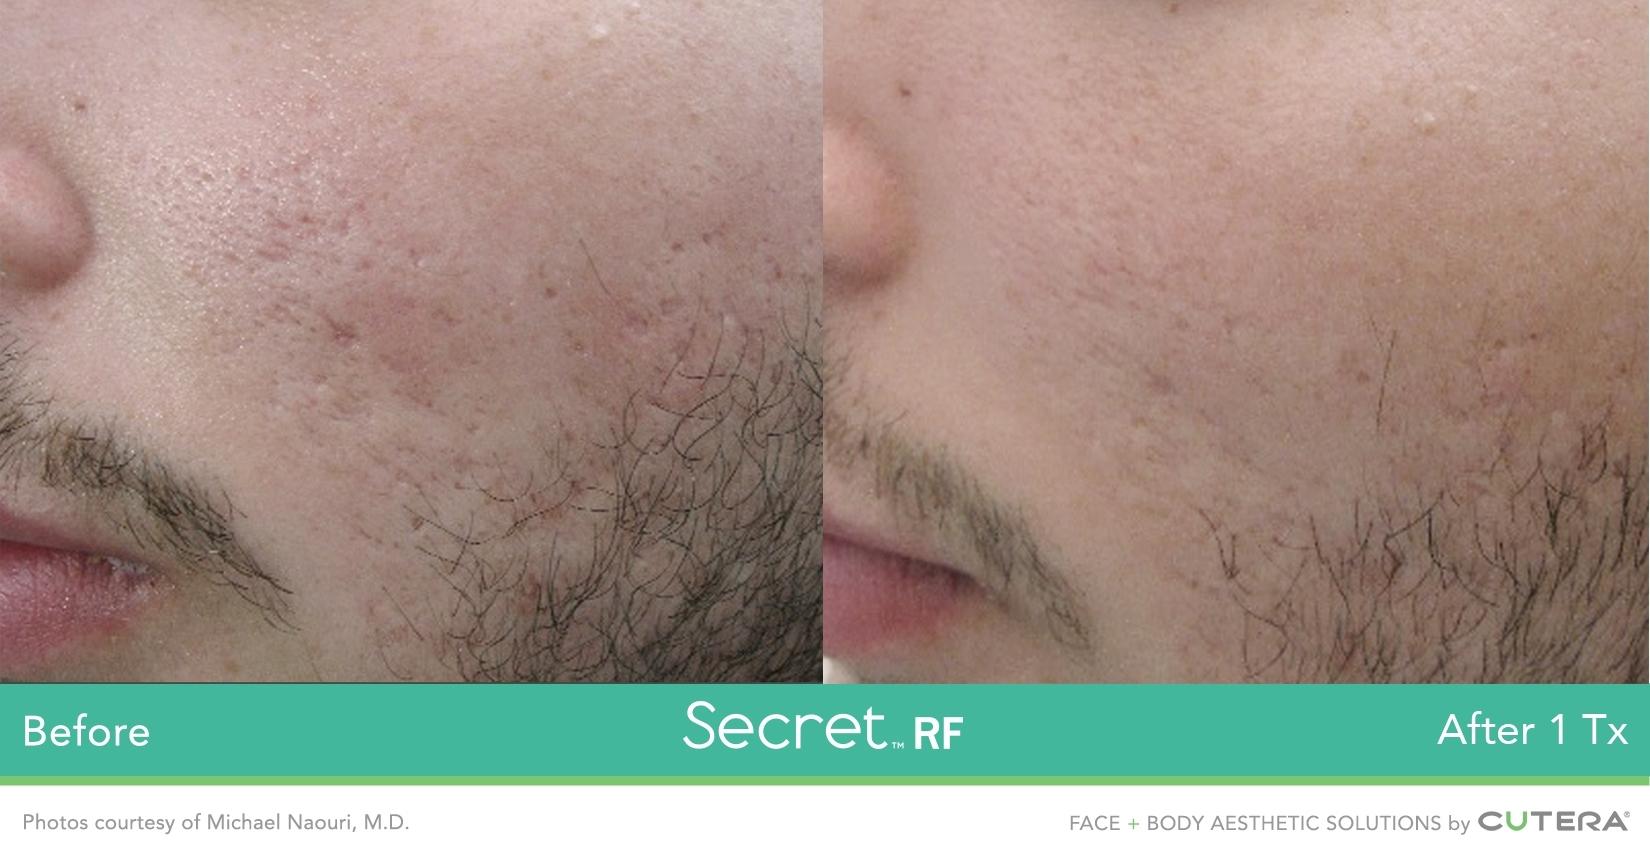 Secret RF: Patient 3 - Before and After 1